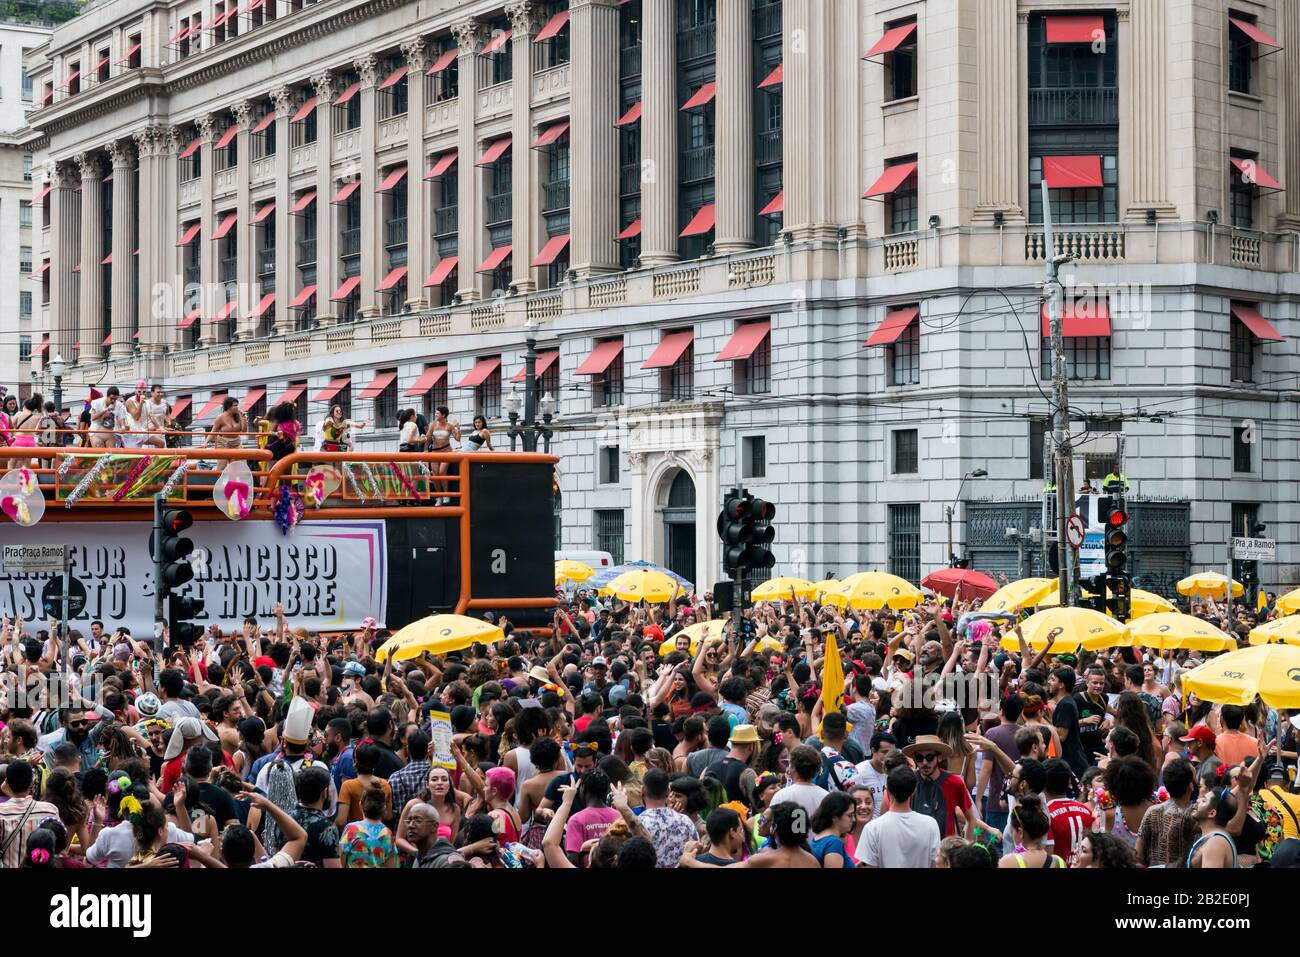 SAO PAULO, BRAZIL - 01 MARCH, 2020: Horizontal picture of crowds celebration diversity during carnaval in the streets of São Paulo, a popular brazilia Stock Photo